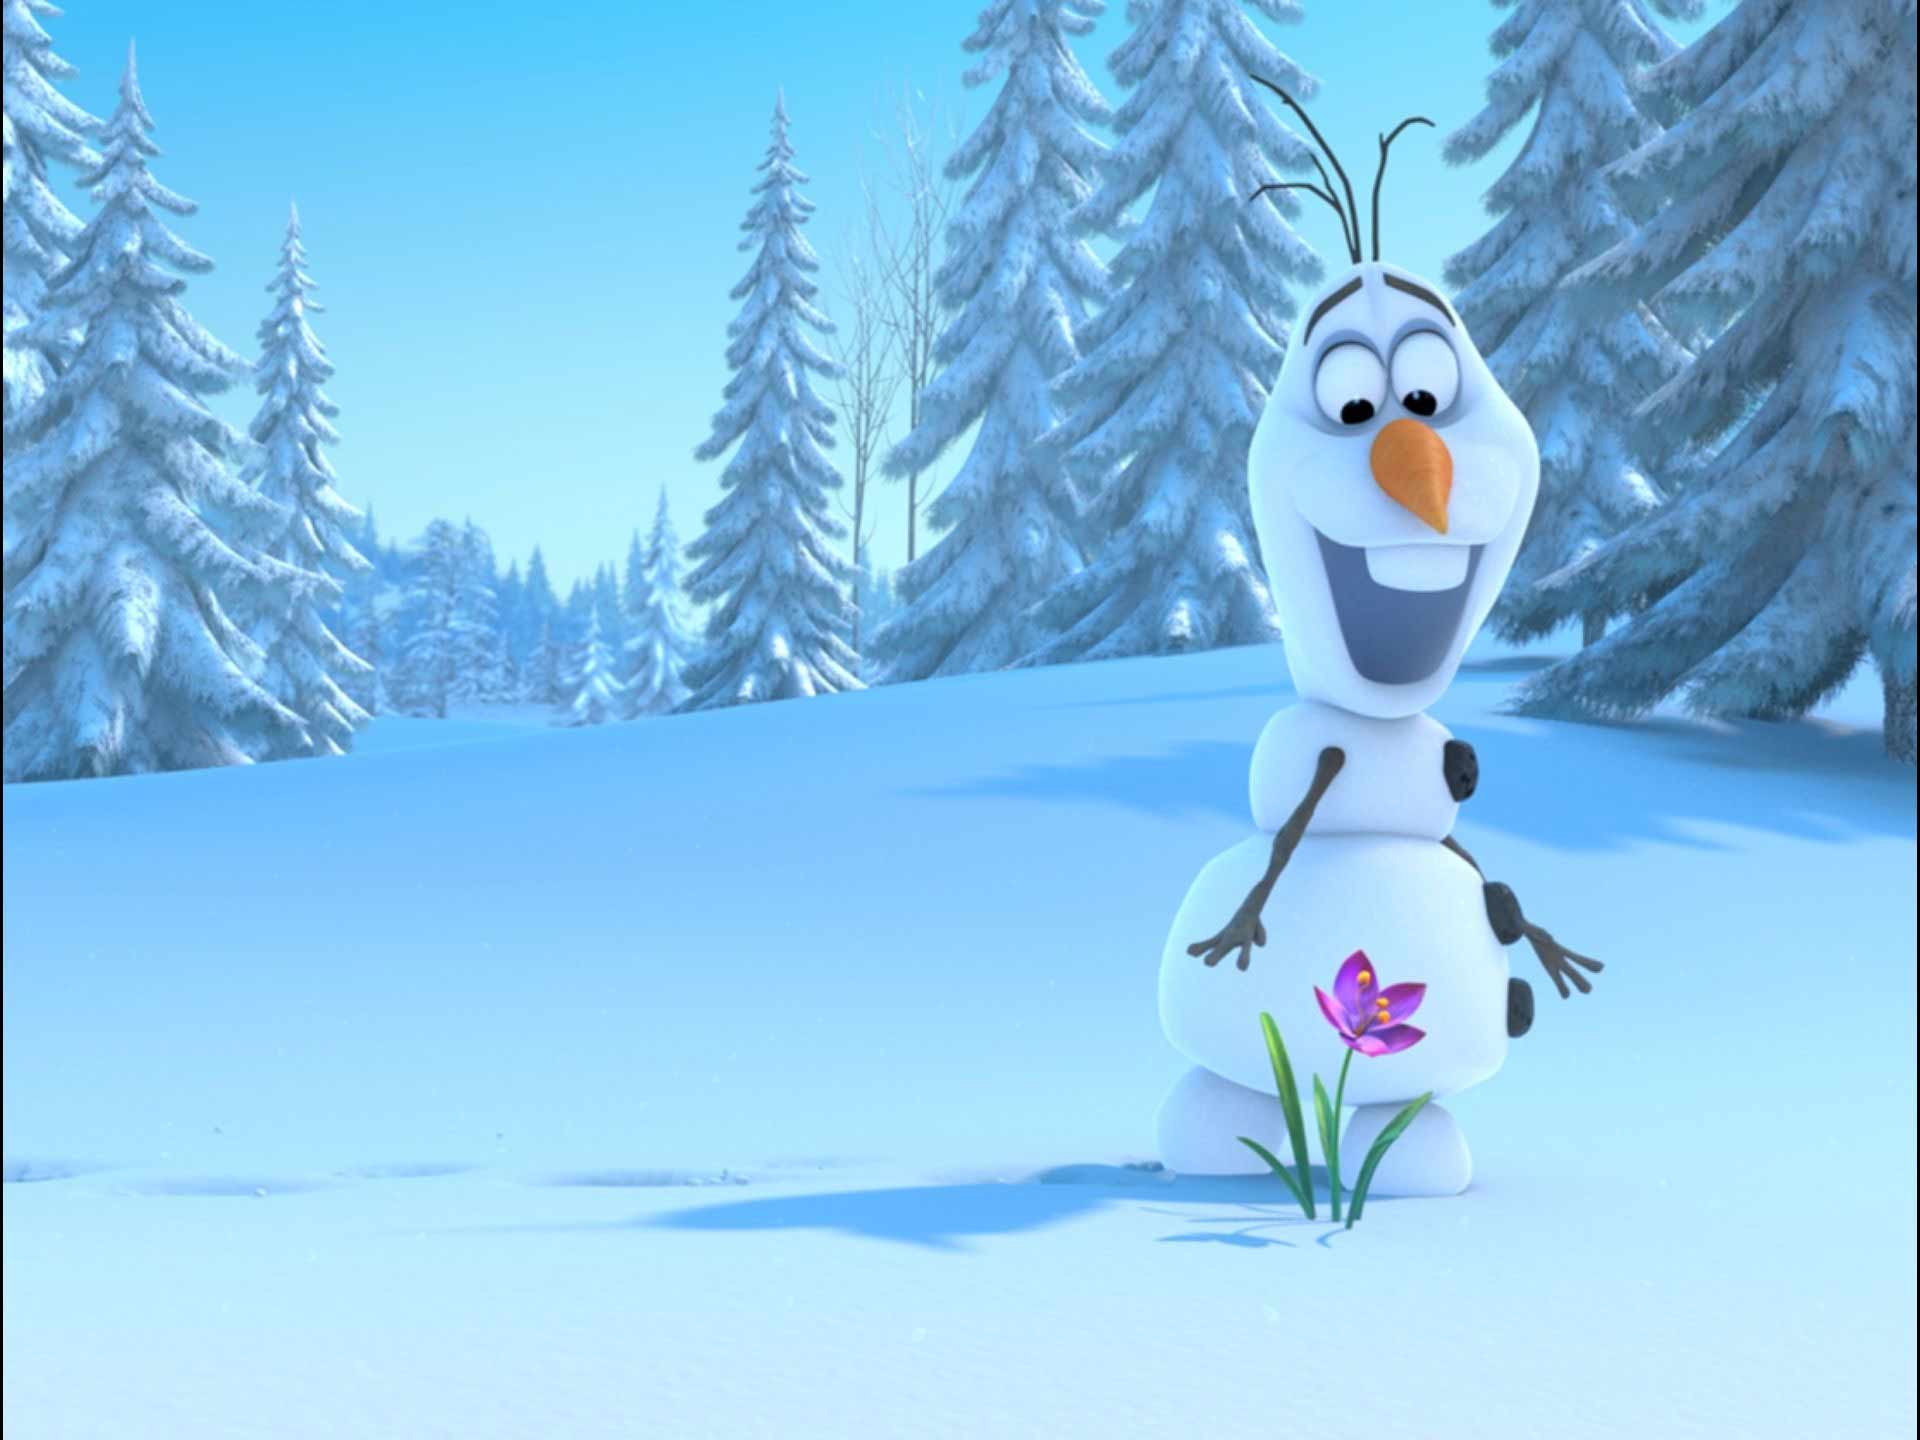  backgrounds anna frozen movie wallpapers free disney movie wallpapers 1920x1440